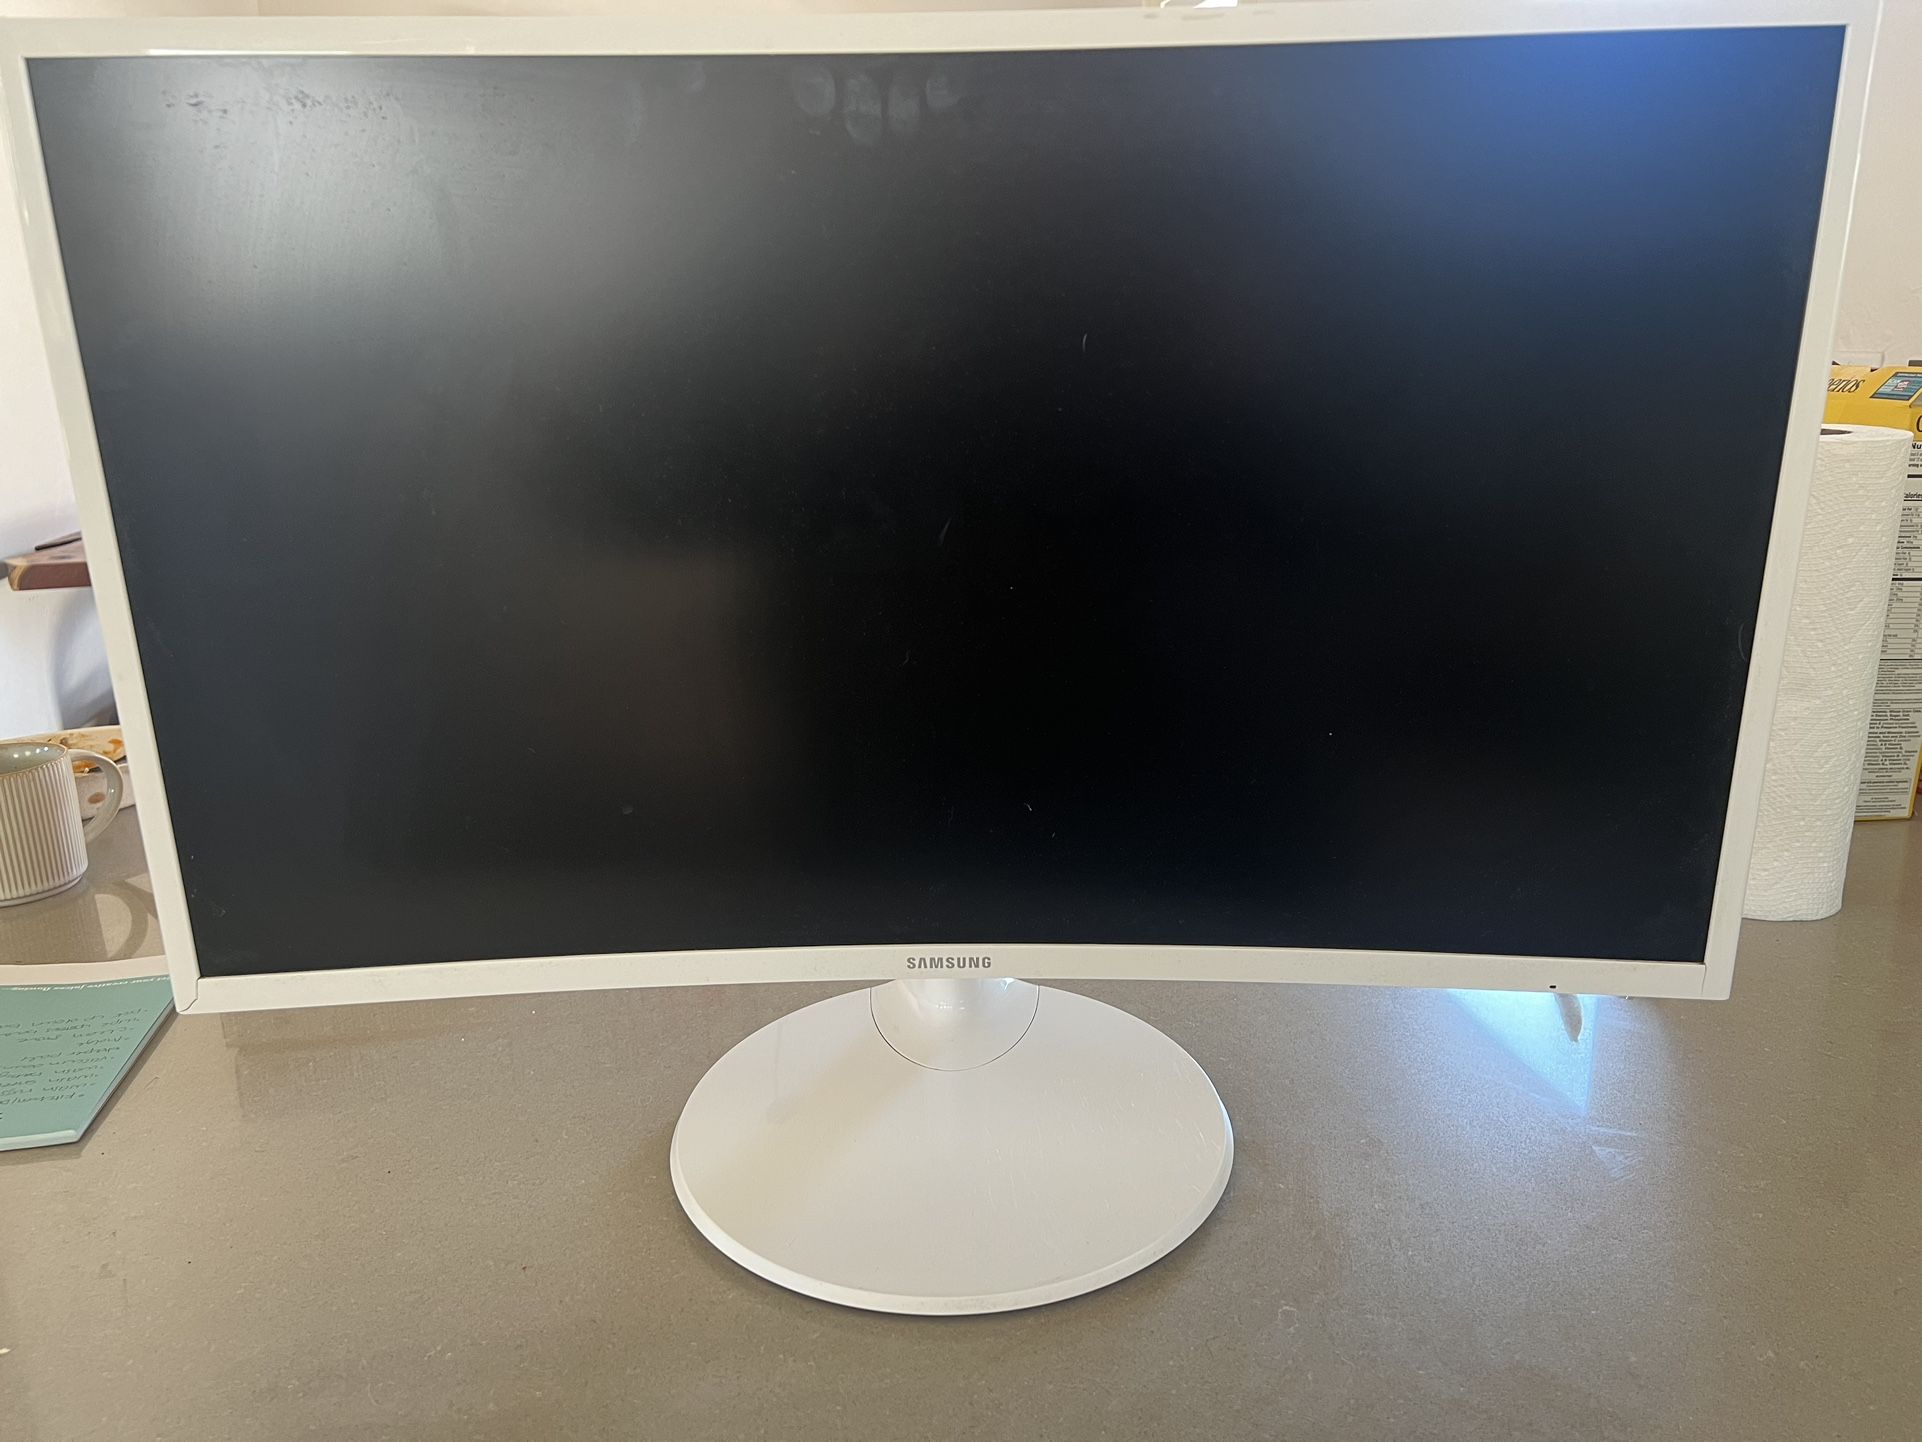 Samsung 27” Curved Monitor